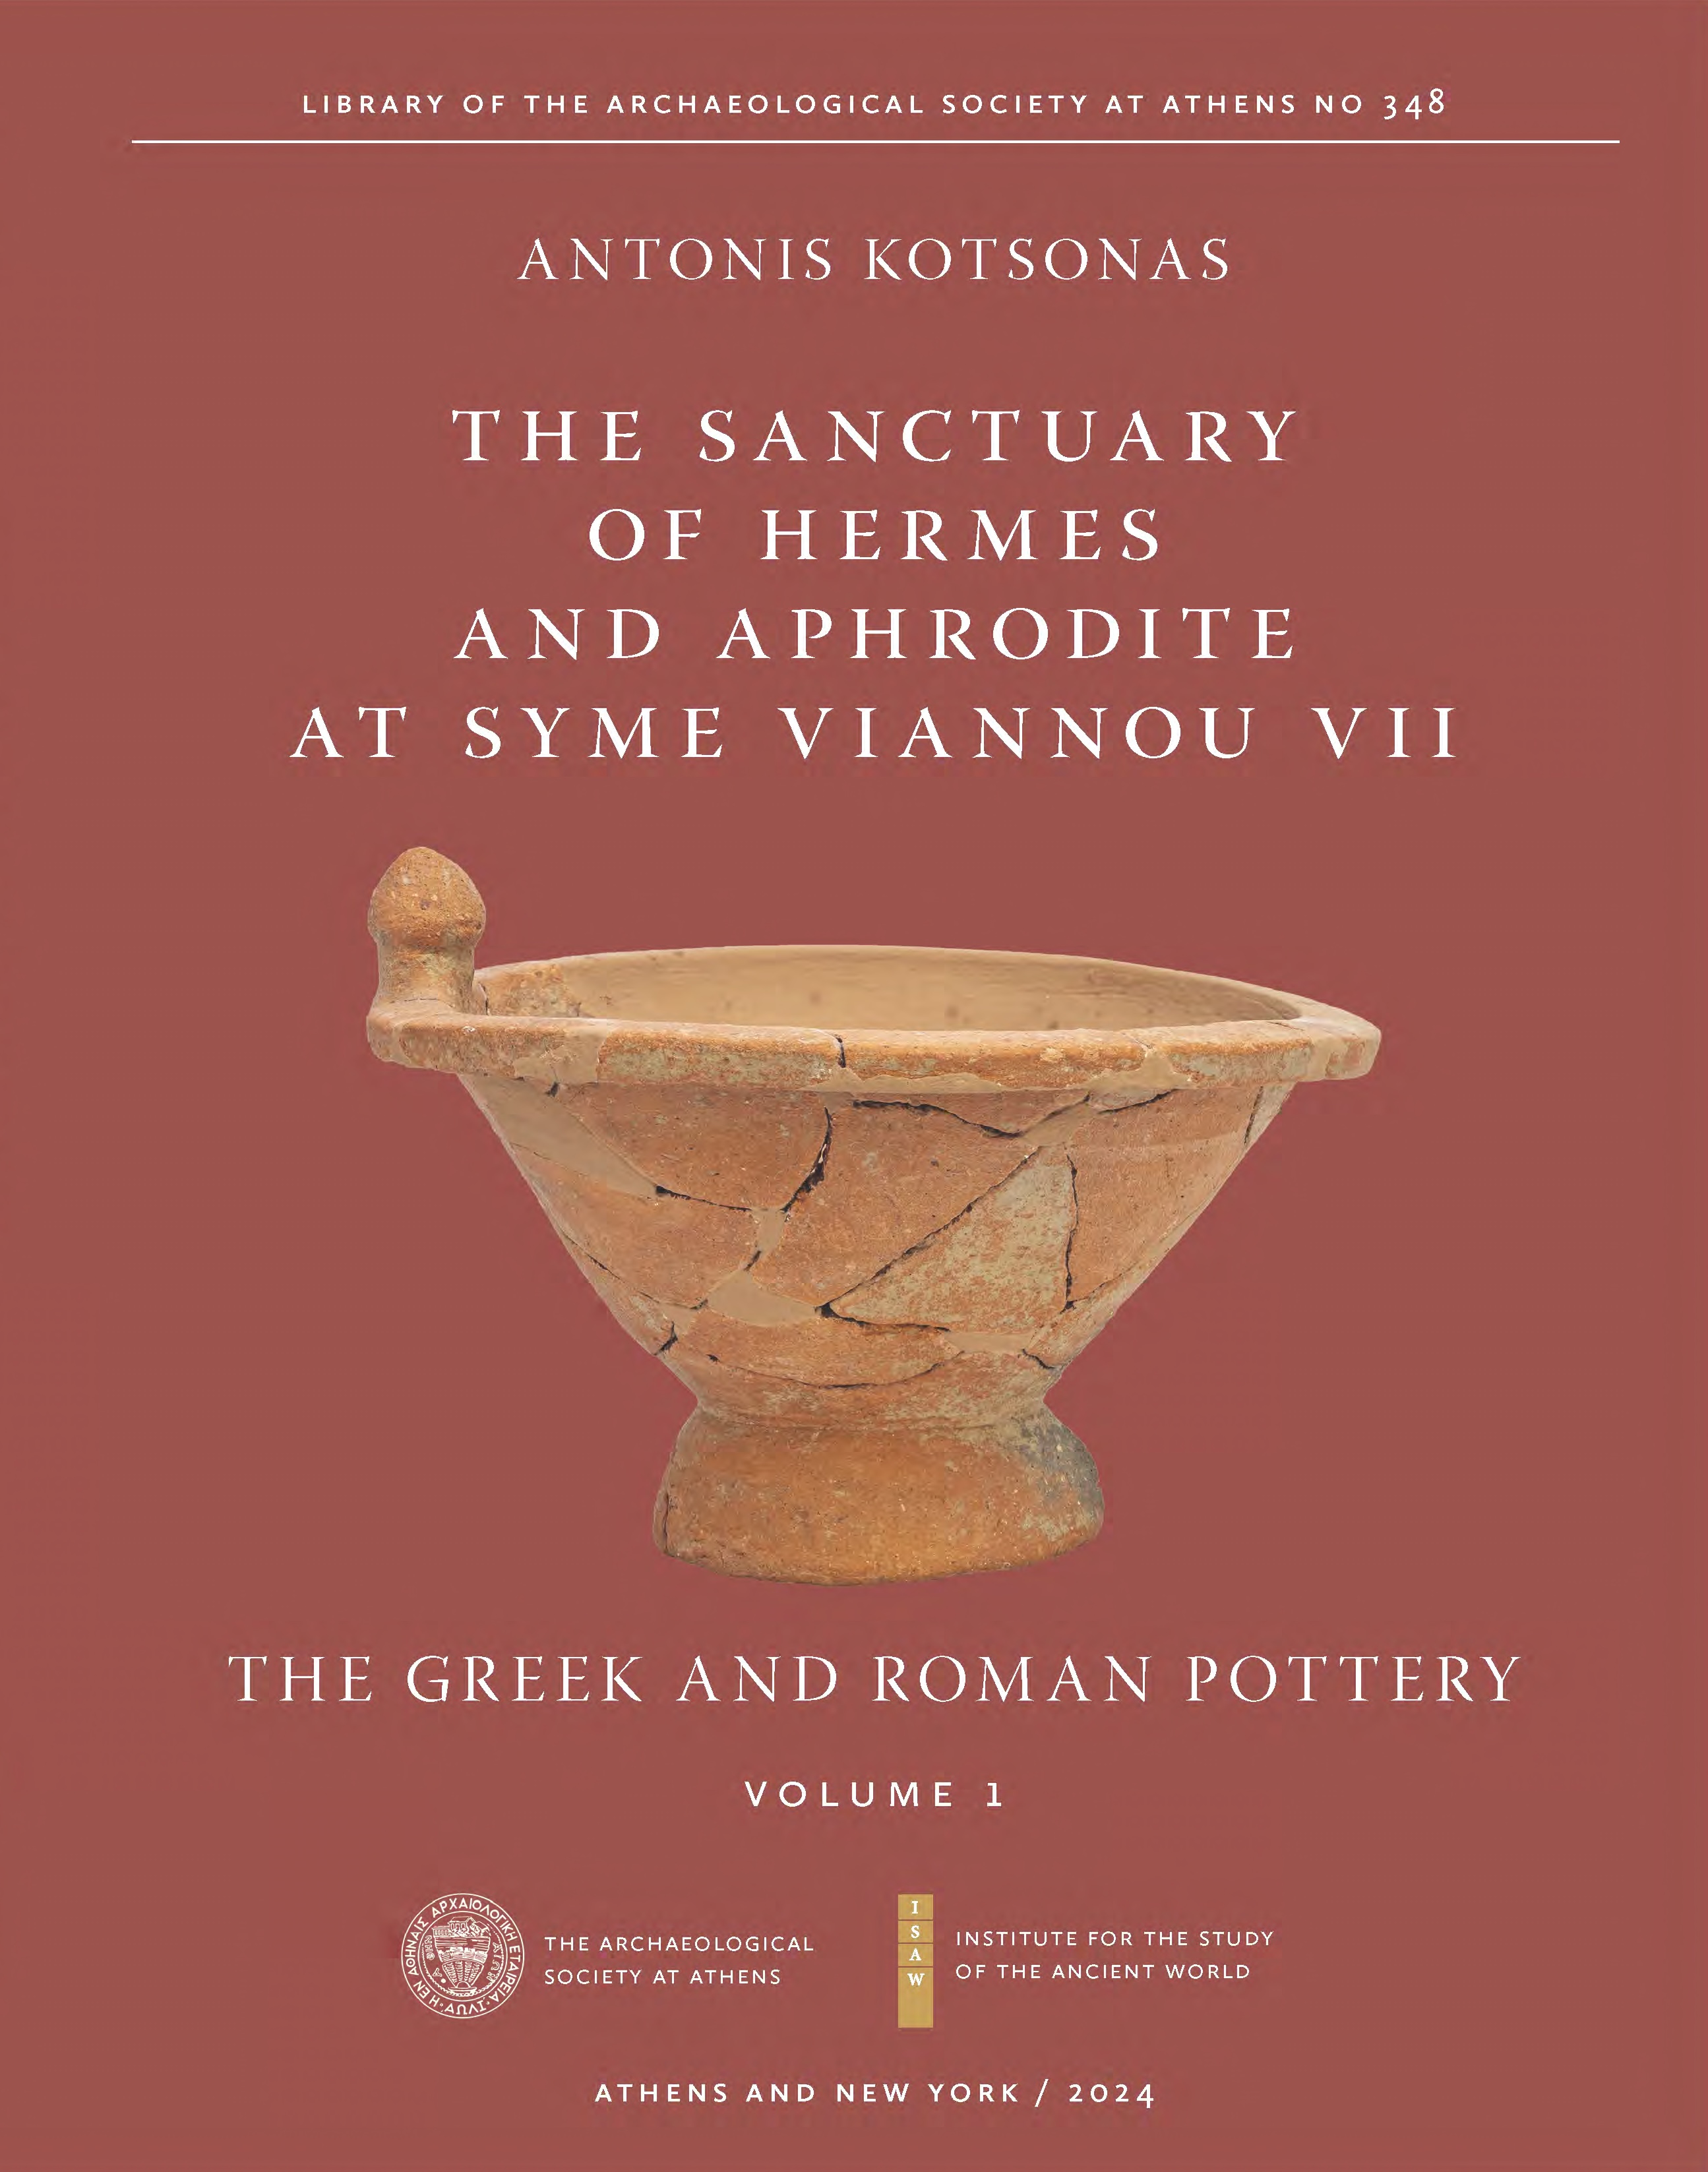 ISAW announces the publication of The Sanctuary of Hermes and Aphrodite at Syme Viannou VII: The Greek and Roman Pottery